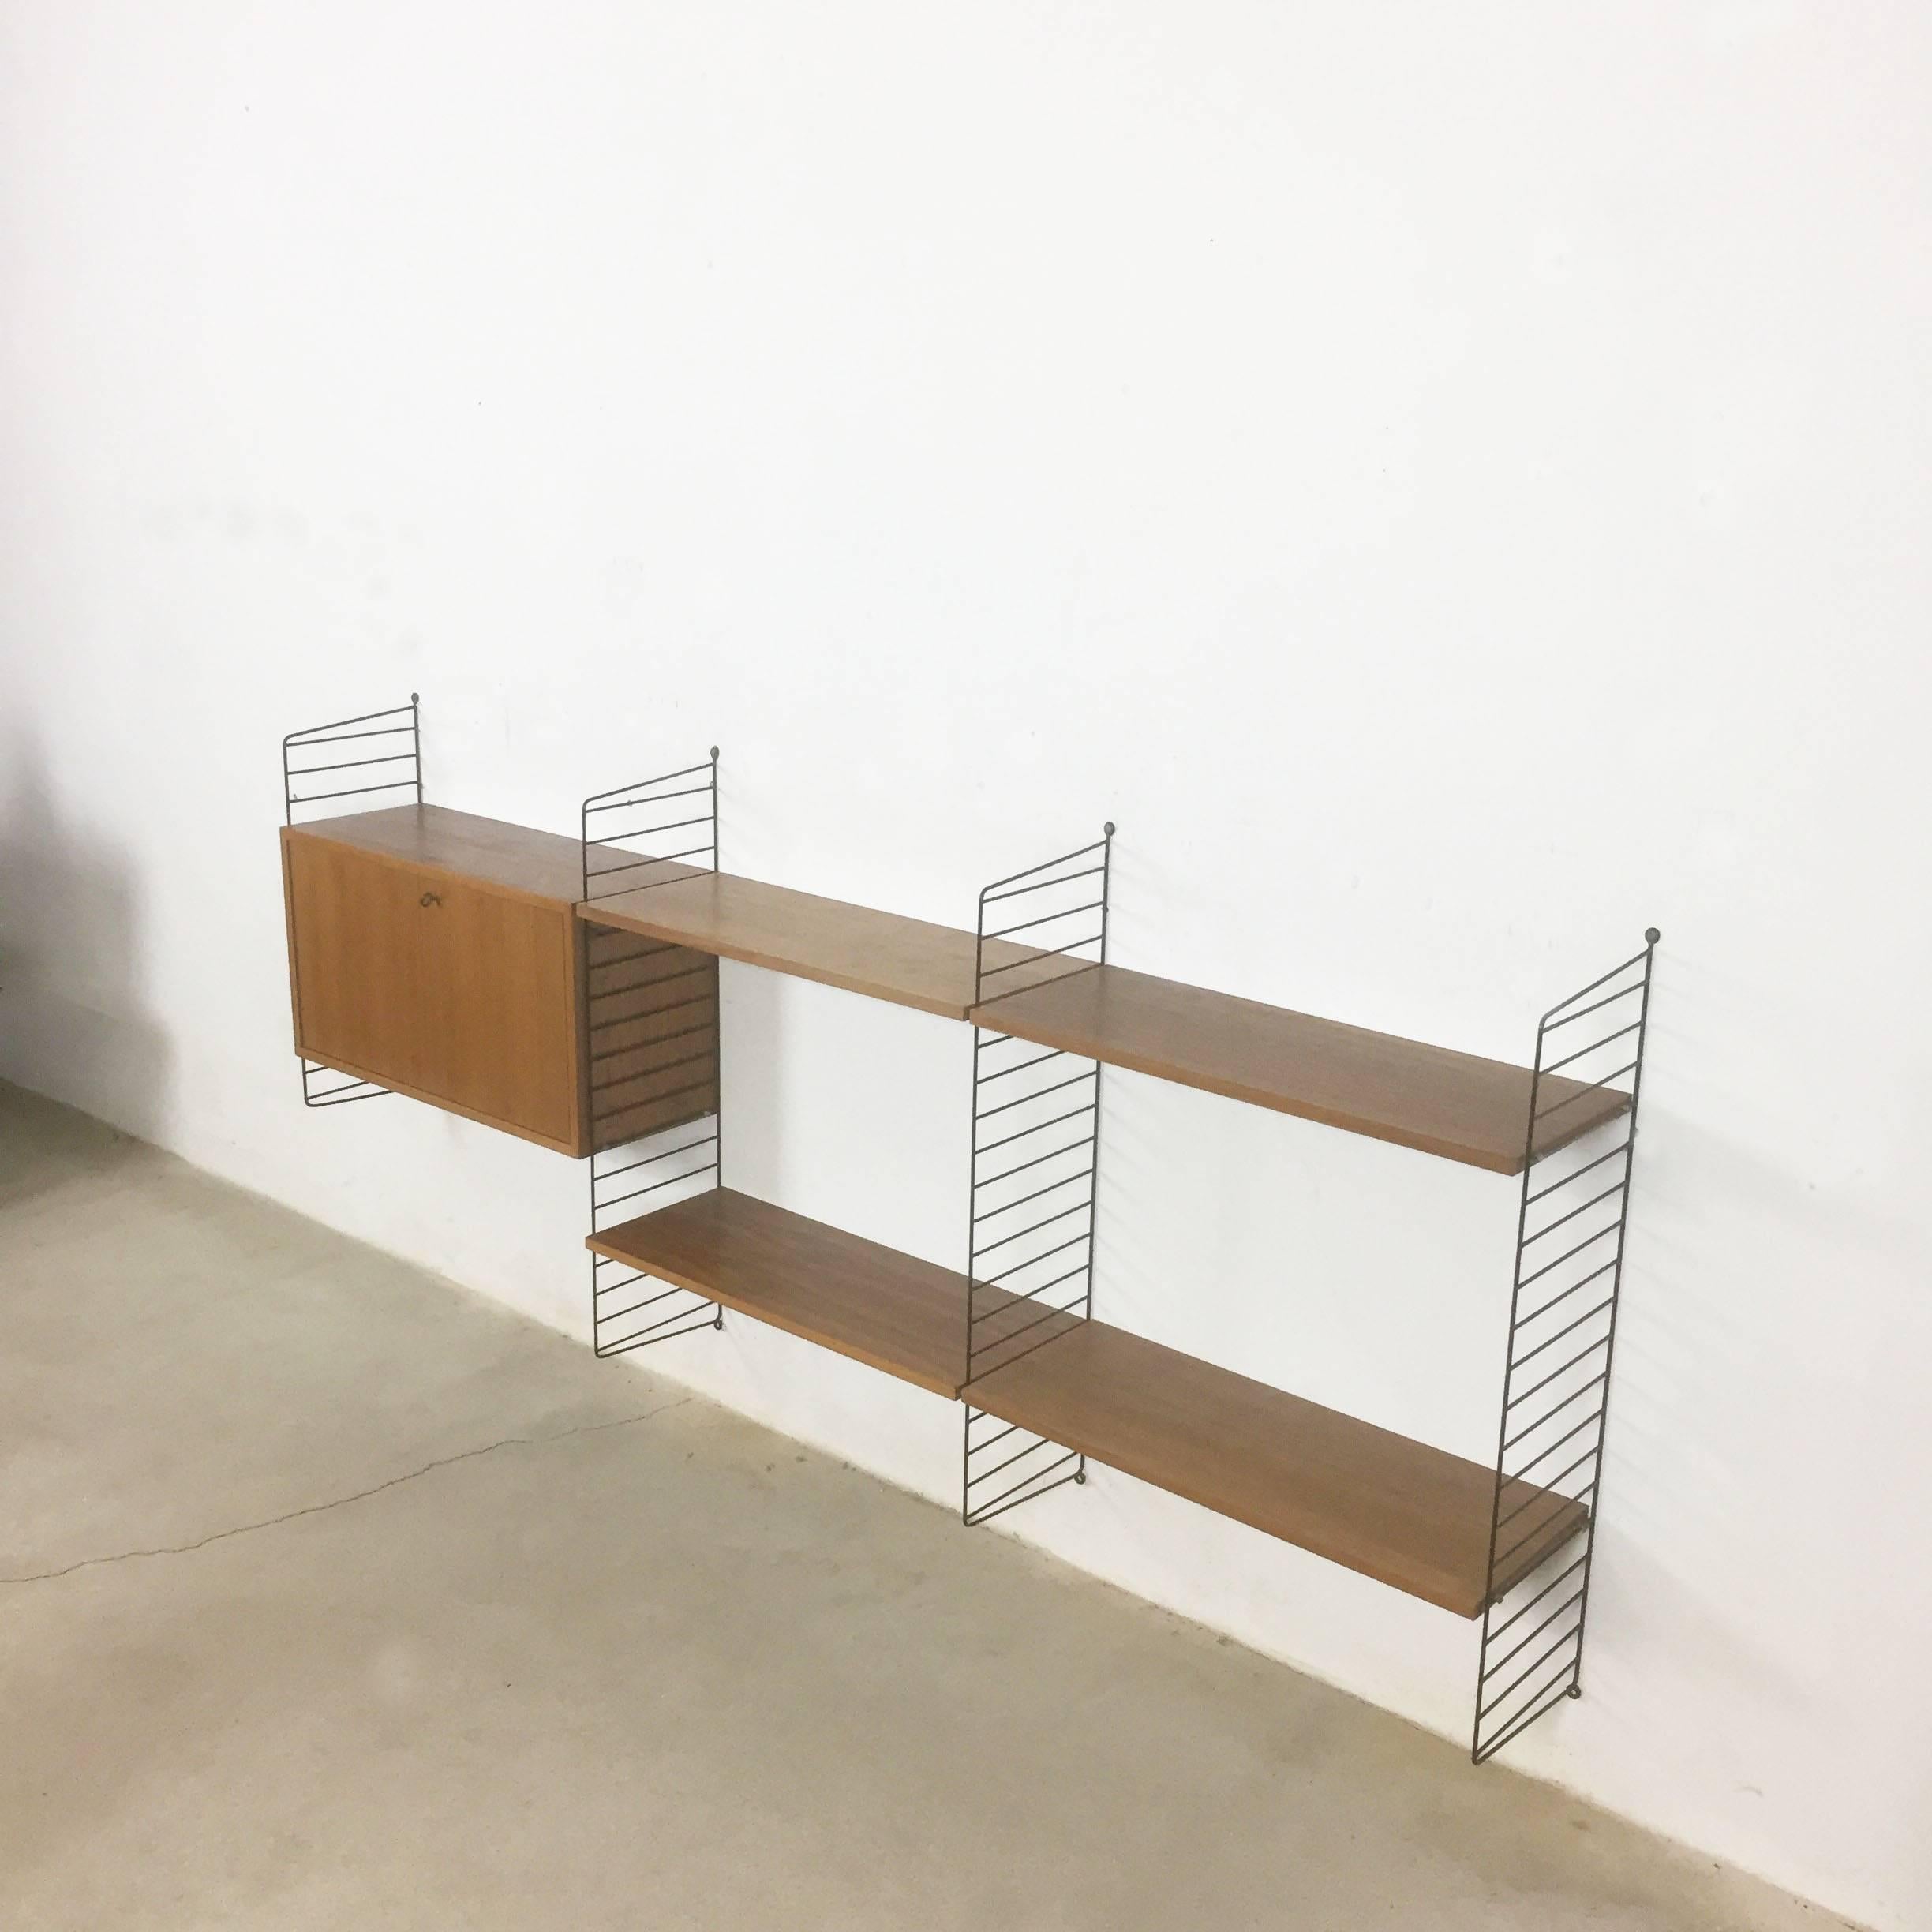 String regal wall unit

Made in Sweden

Bokhyllan ’The Ladder Shelf’

Design: Nils und Kajsa Strinning, 1949

The architect Nisse Strinning was born in 1917. From 1940 to 1947 he studied architecture in Stockholm, before he designed the